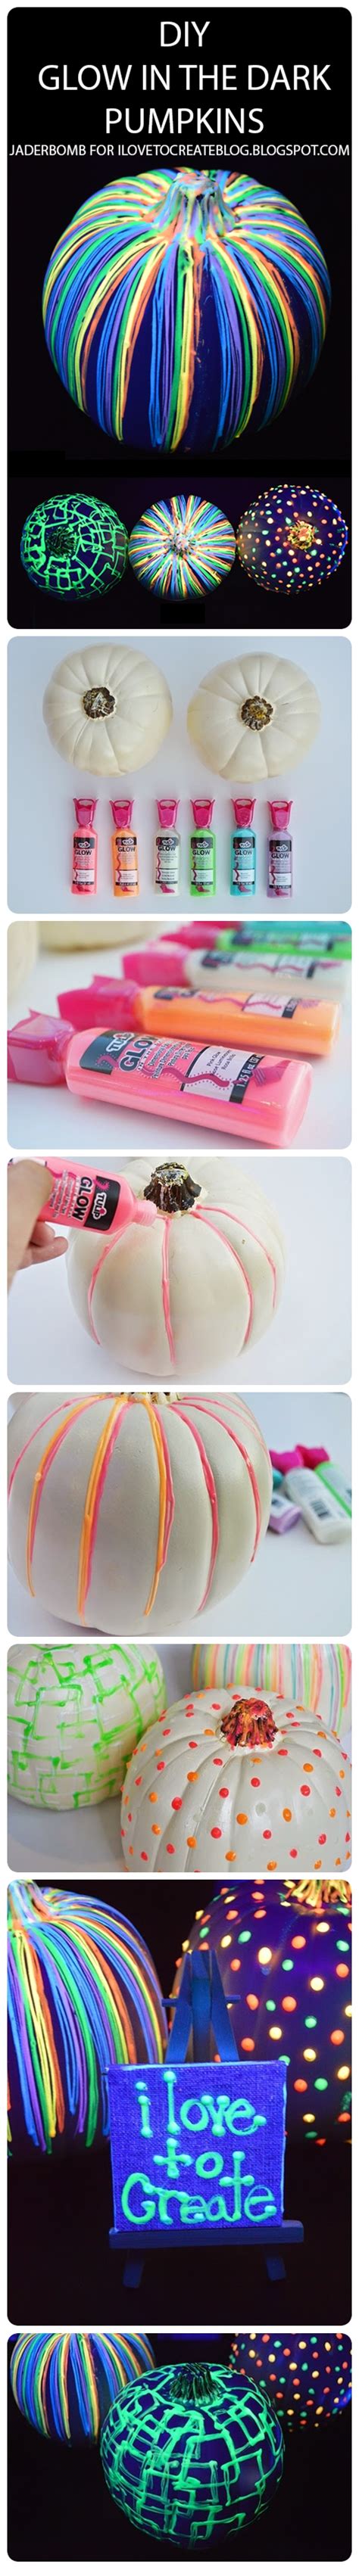 Exfoliate with a diy scrub on day 2 0 one of the best ways to exfoliate, remove the dead skin cells and gunk from the pores, is with the help of a. DIY Glow In The Dark Pumpkin Pictures, Photos, and Images for Facebook, Tumblr, Pinterest, and ...